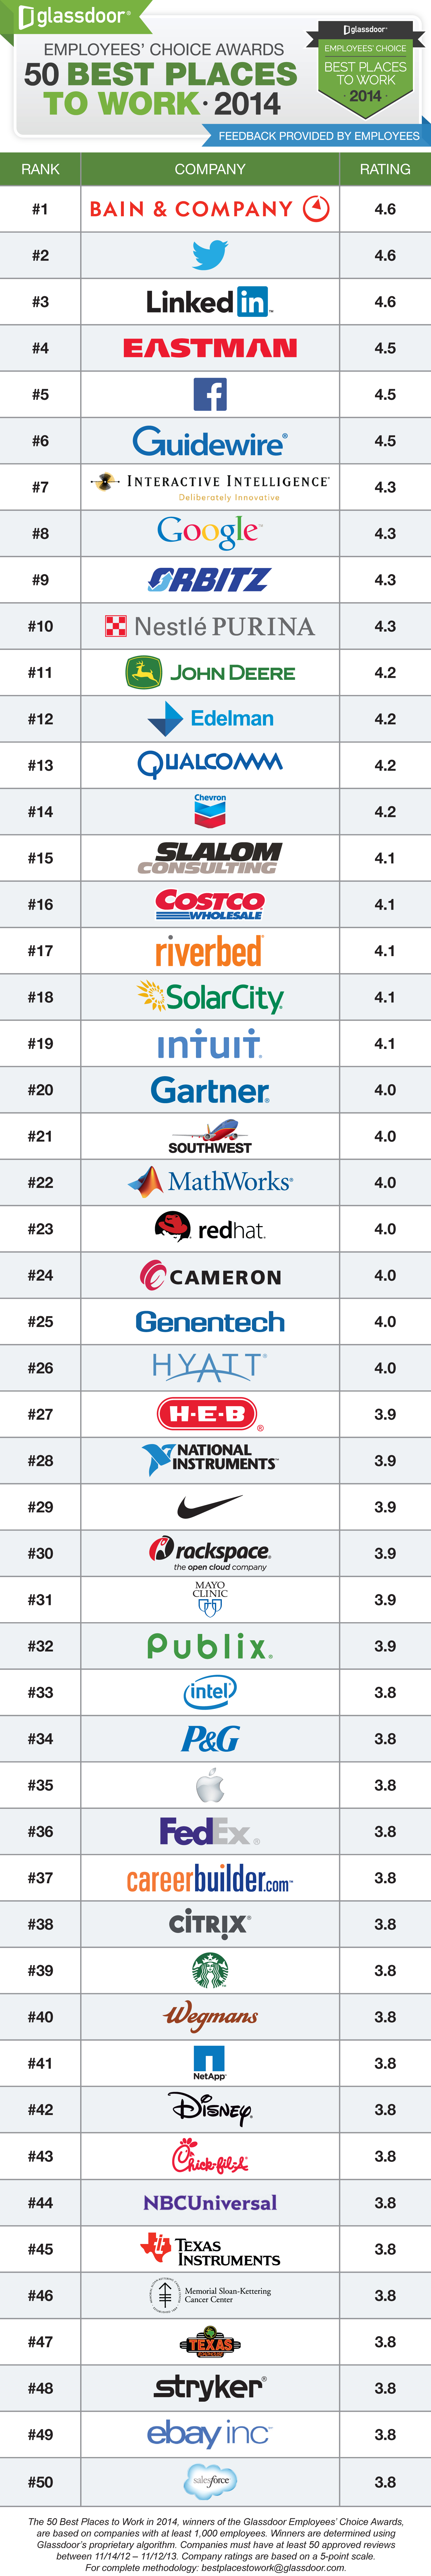 Twitter Best Tech Company to Work For, LinkedIn Second, Facebook Third